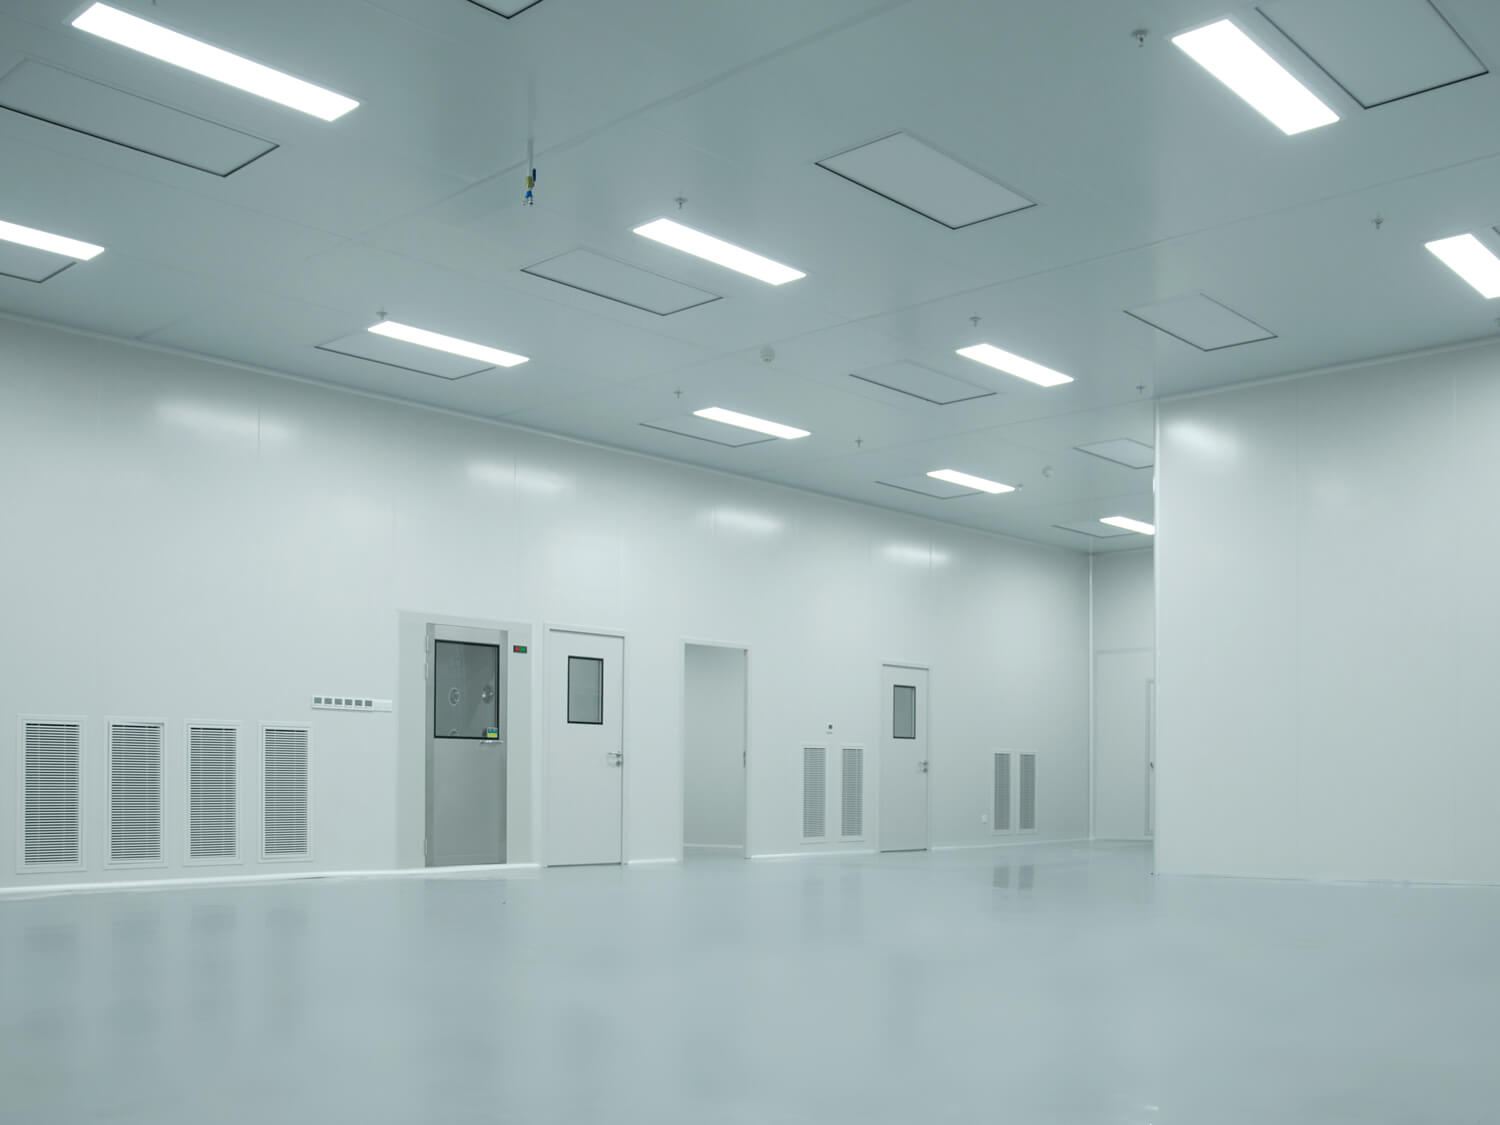 CHARACTERISTICS AND DIFFICULTIES OF ELECTRONIC CLEAN ROOM CONSTRUCTION